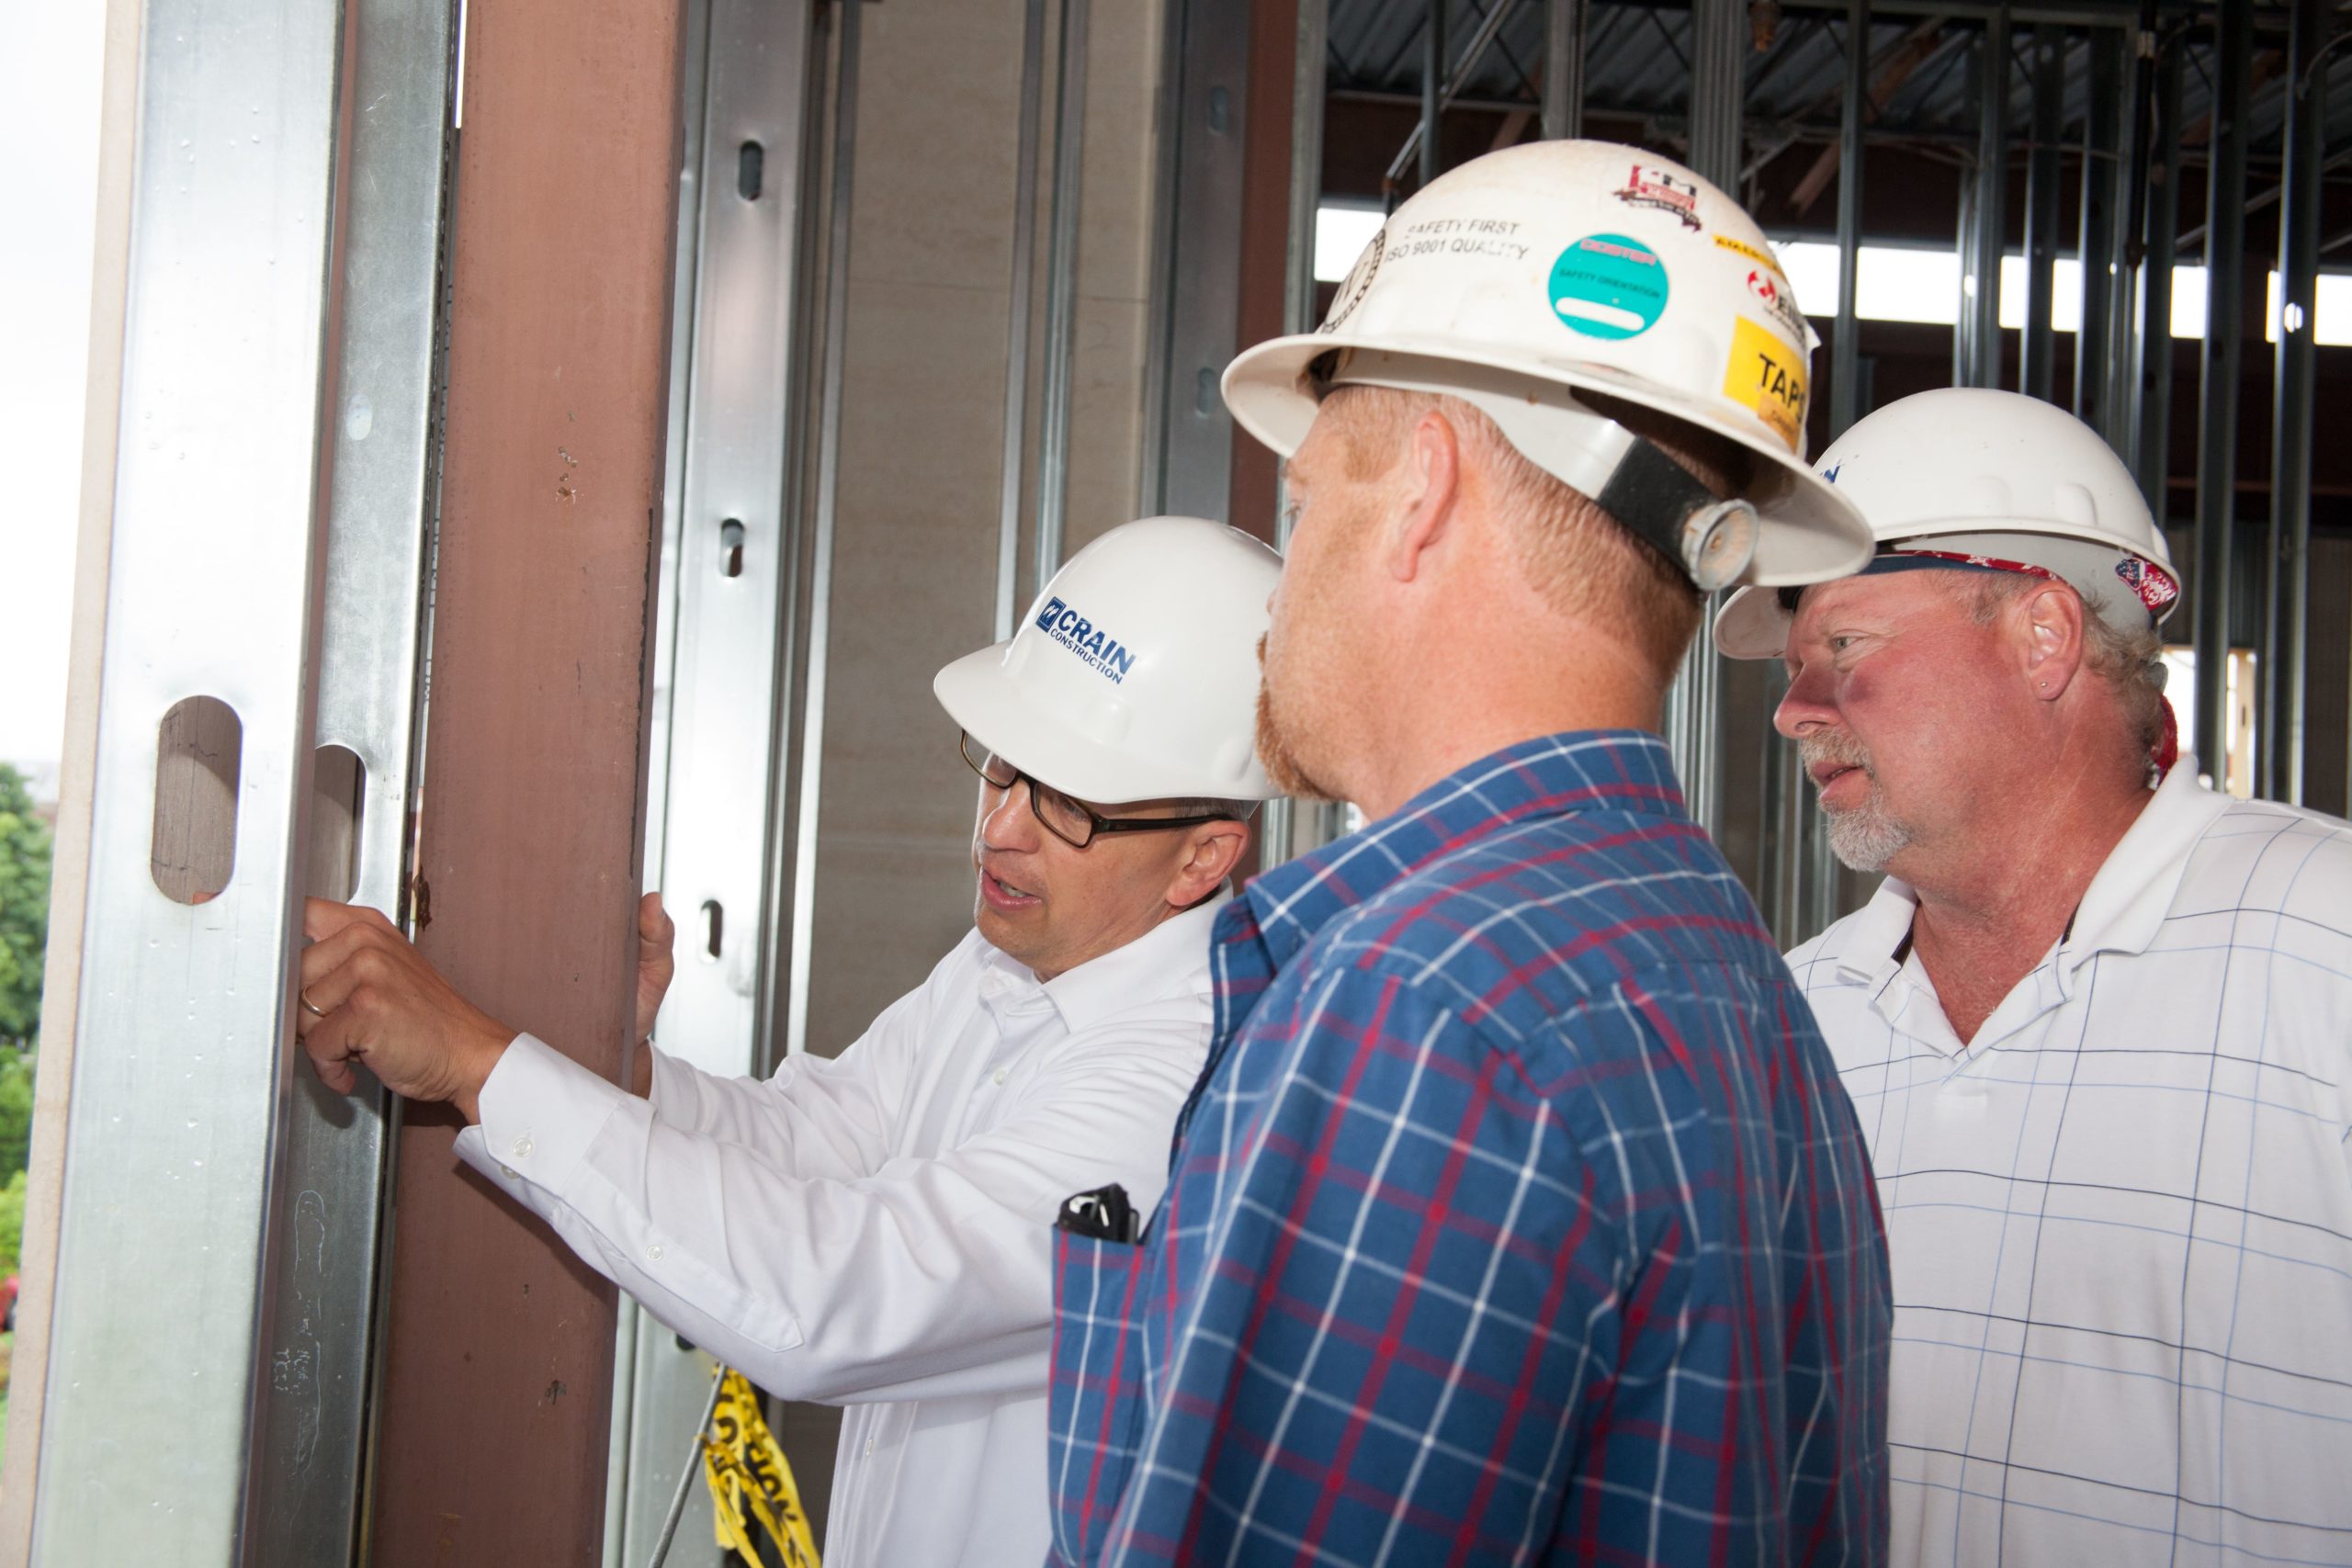 3 Crain employees inspecting a wall on a construction site